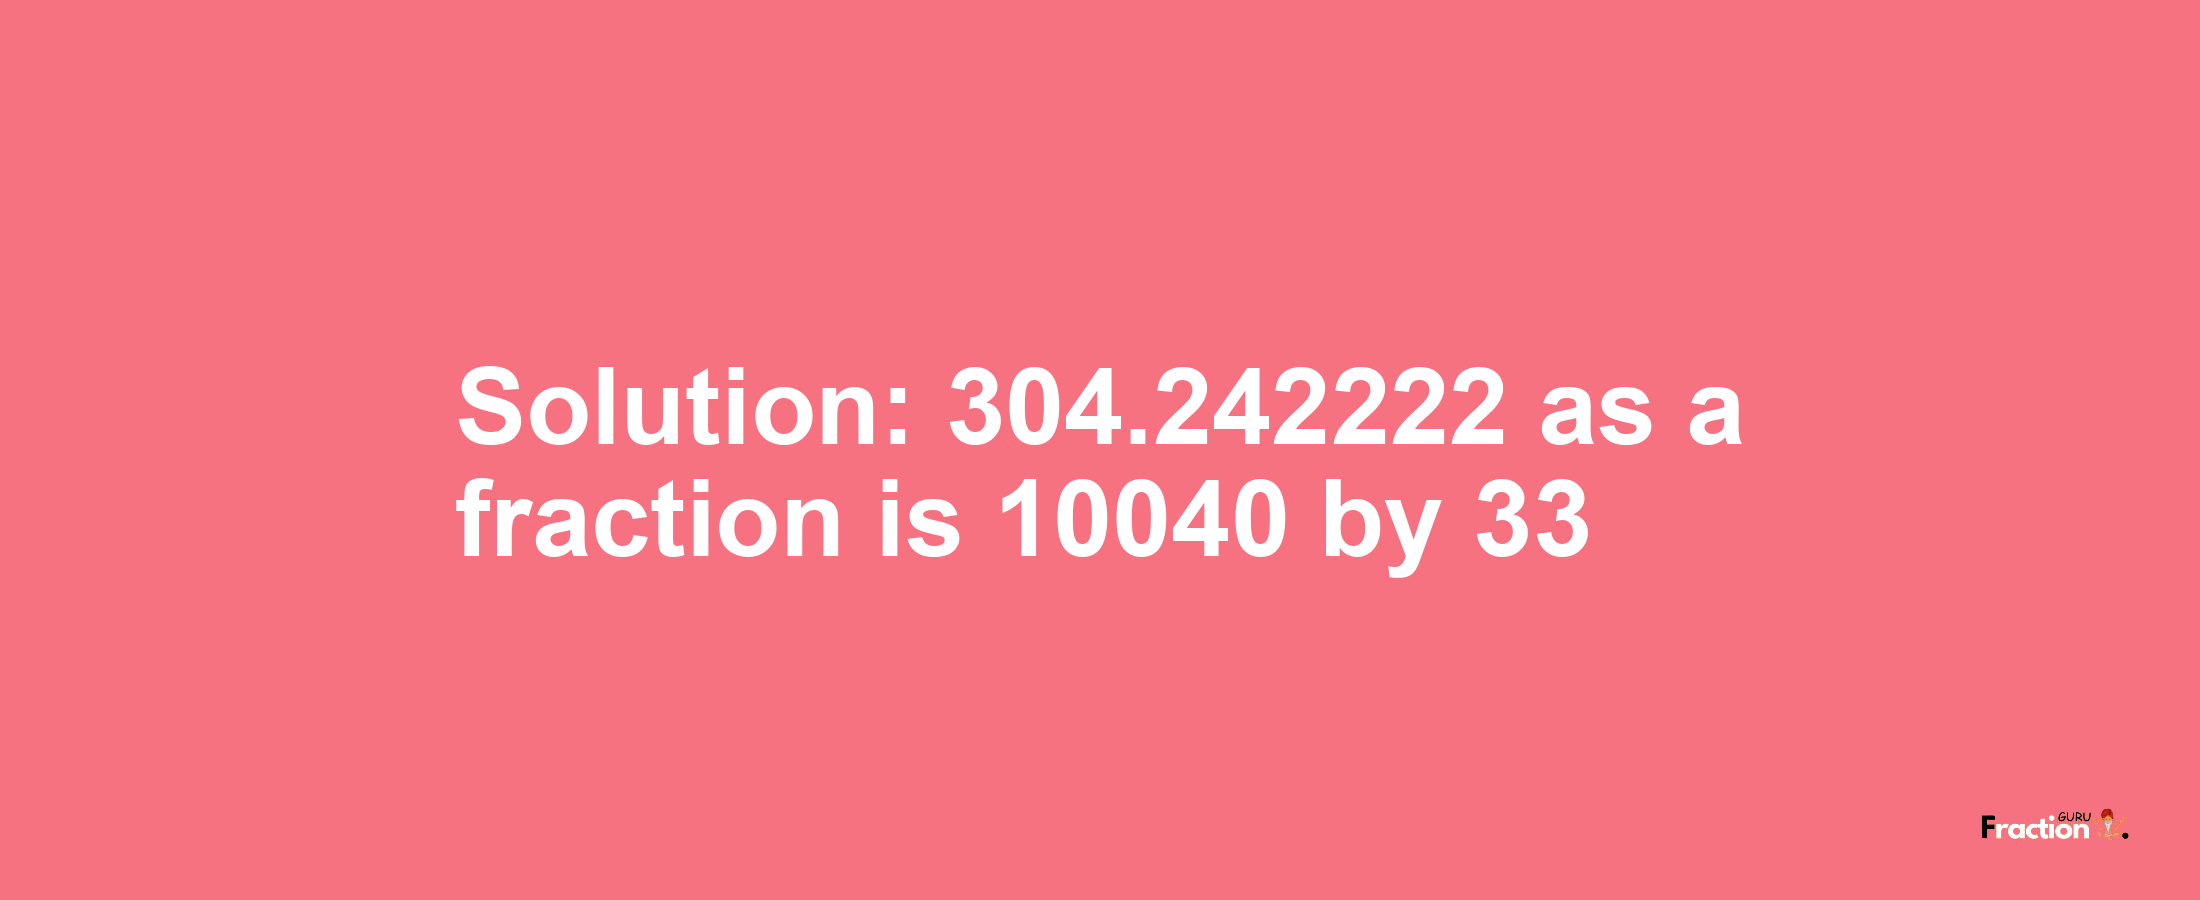 Solution:304.242222 as a fraction is 10040/33